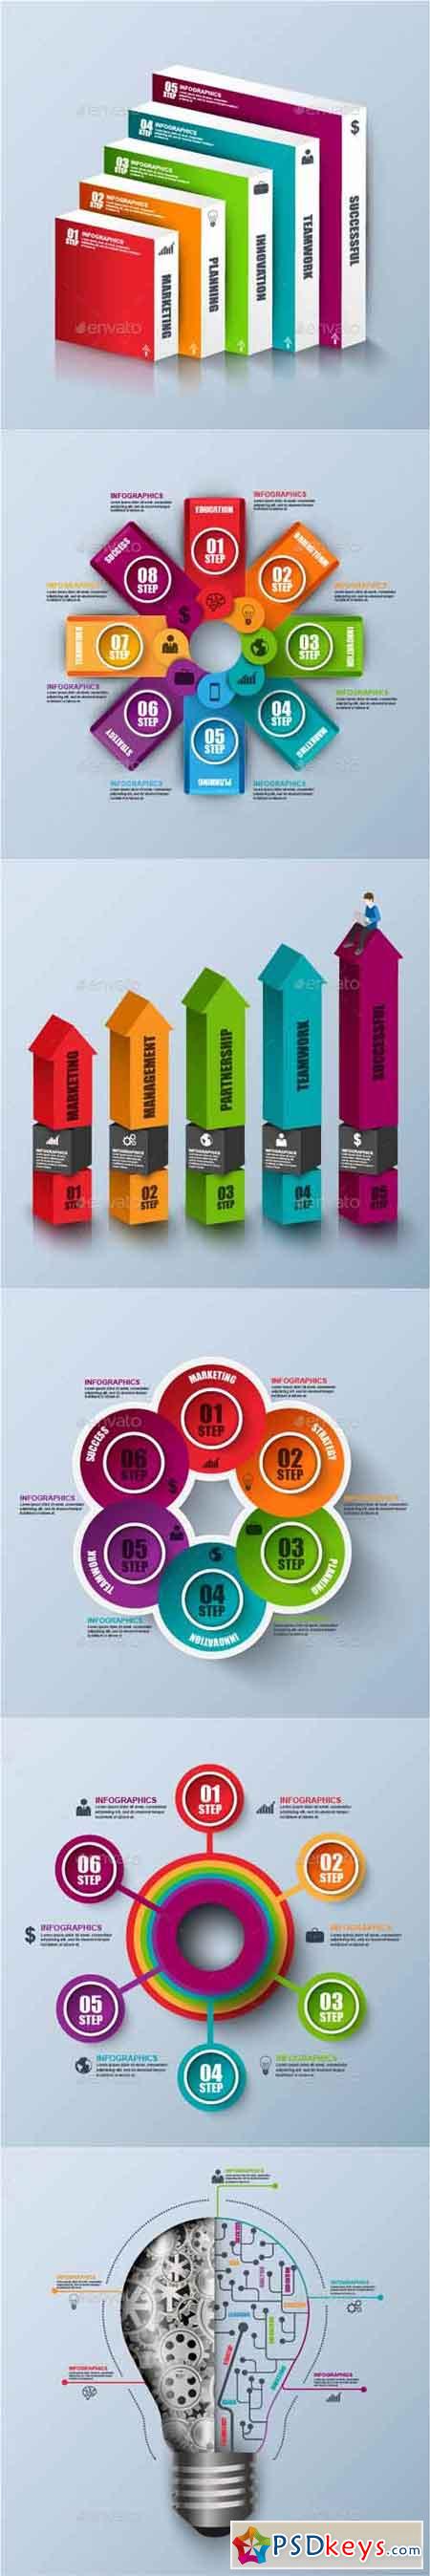 Set of Abstract 3D Digital Business Infographic 17837122